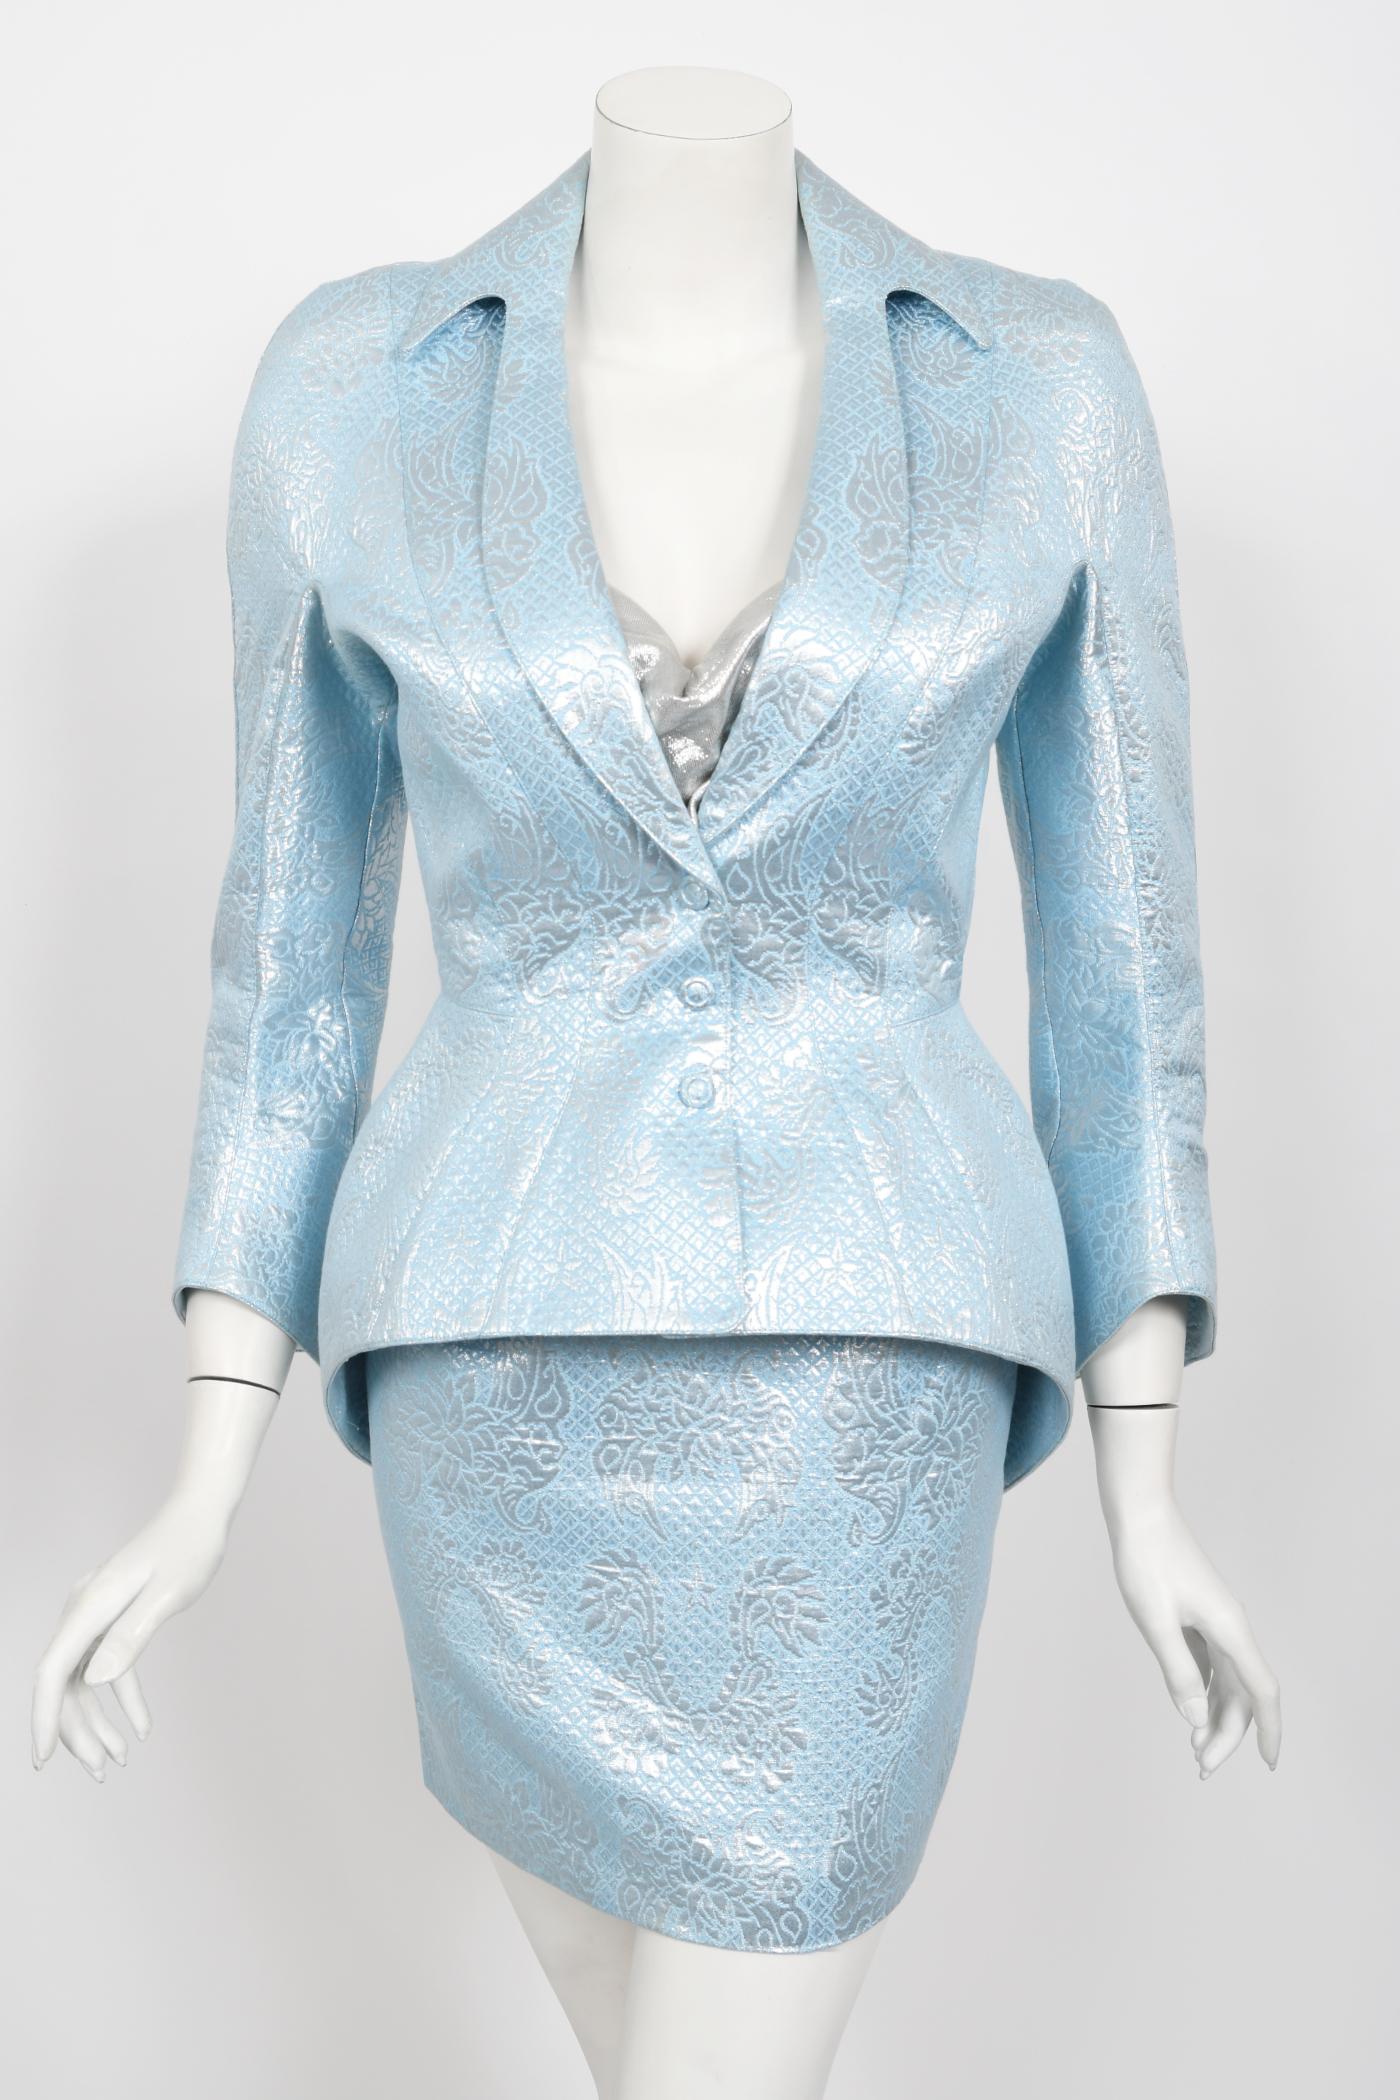 Iconic 1992 Thierry Mugler Couture Metallic Silver Blue Bustier Mini Skirt Suit For Sale 2